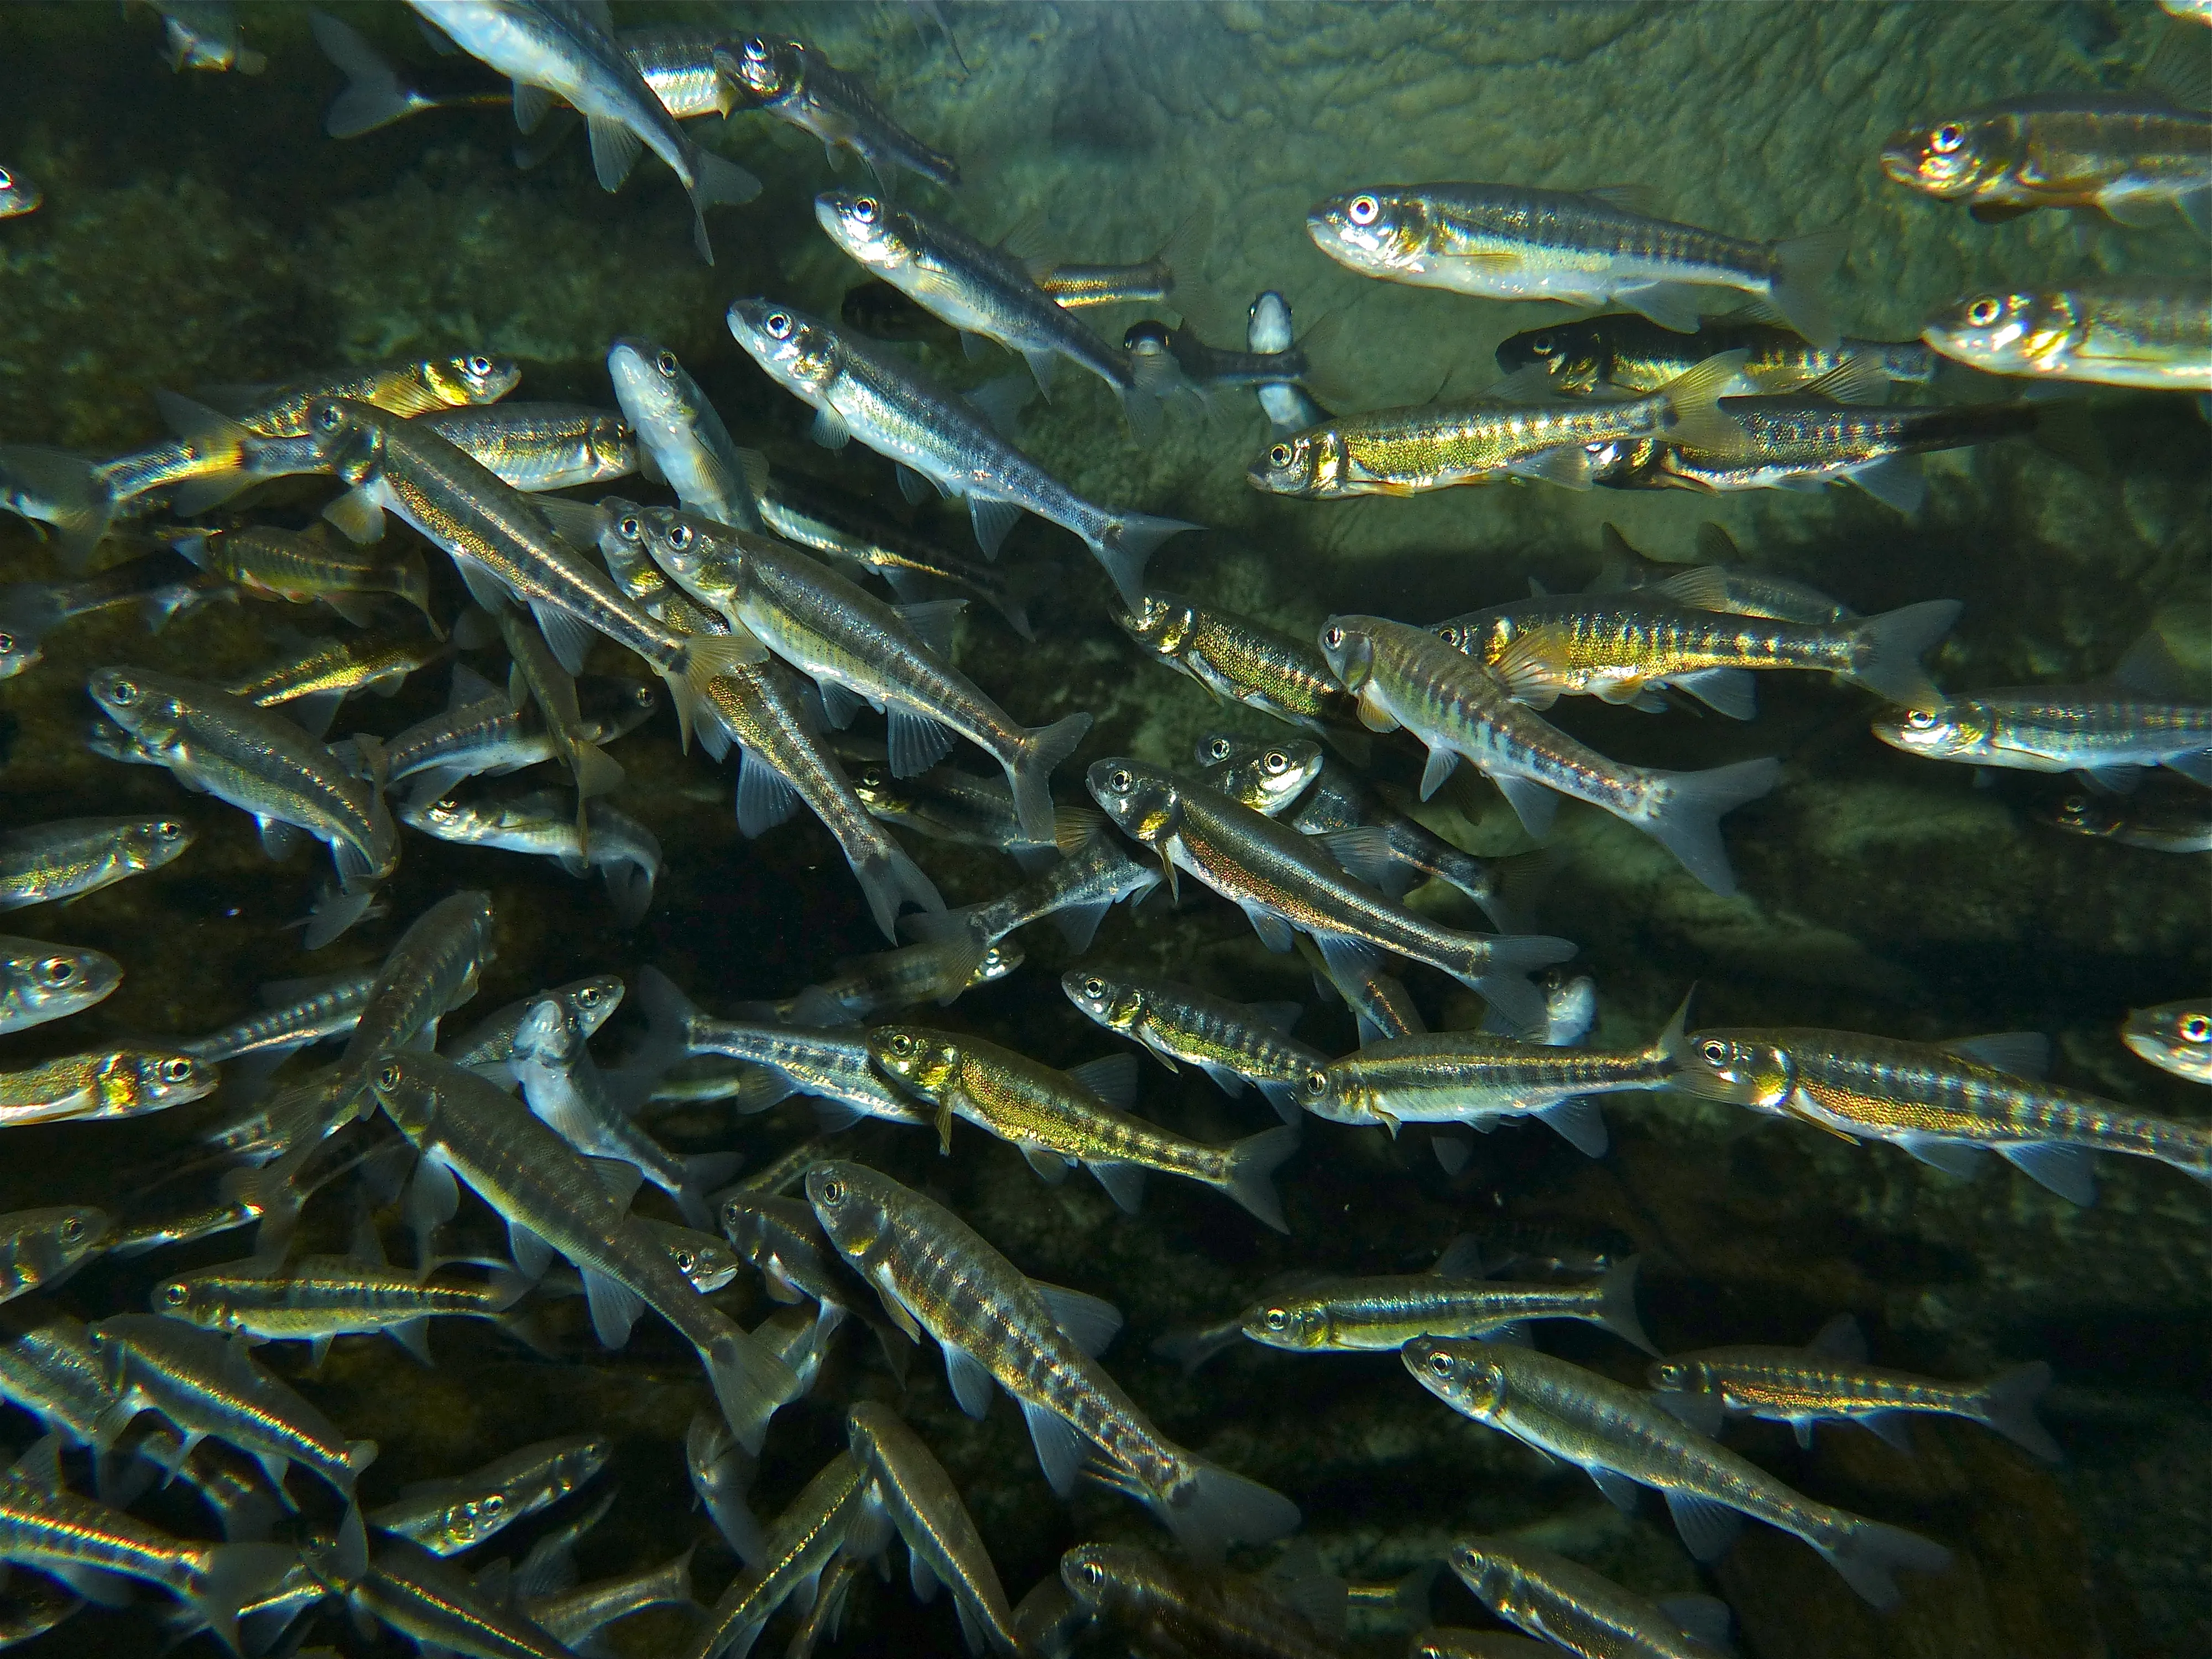 What are minnows?